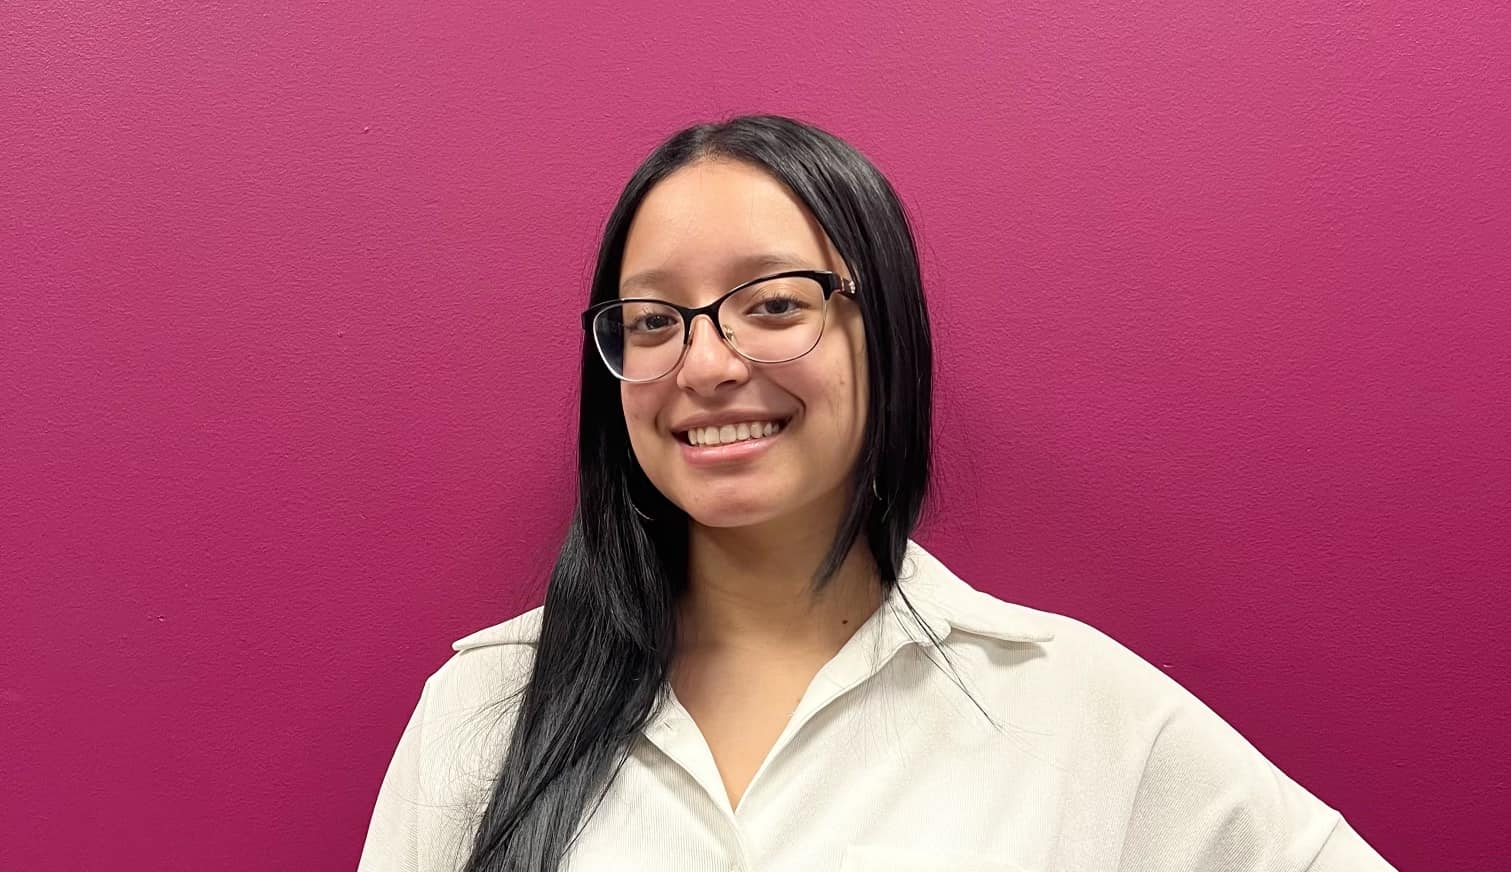 Introducing BGCB’s 2022 Youth of the Year: Leslie